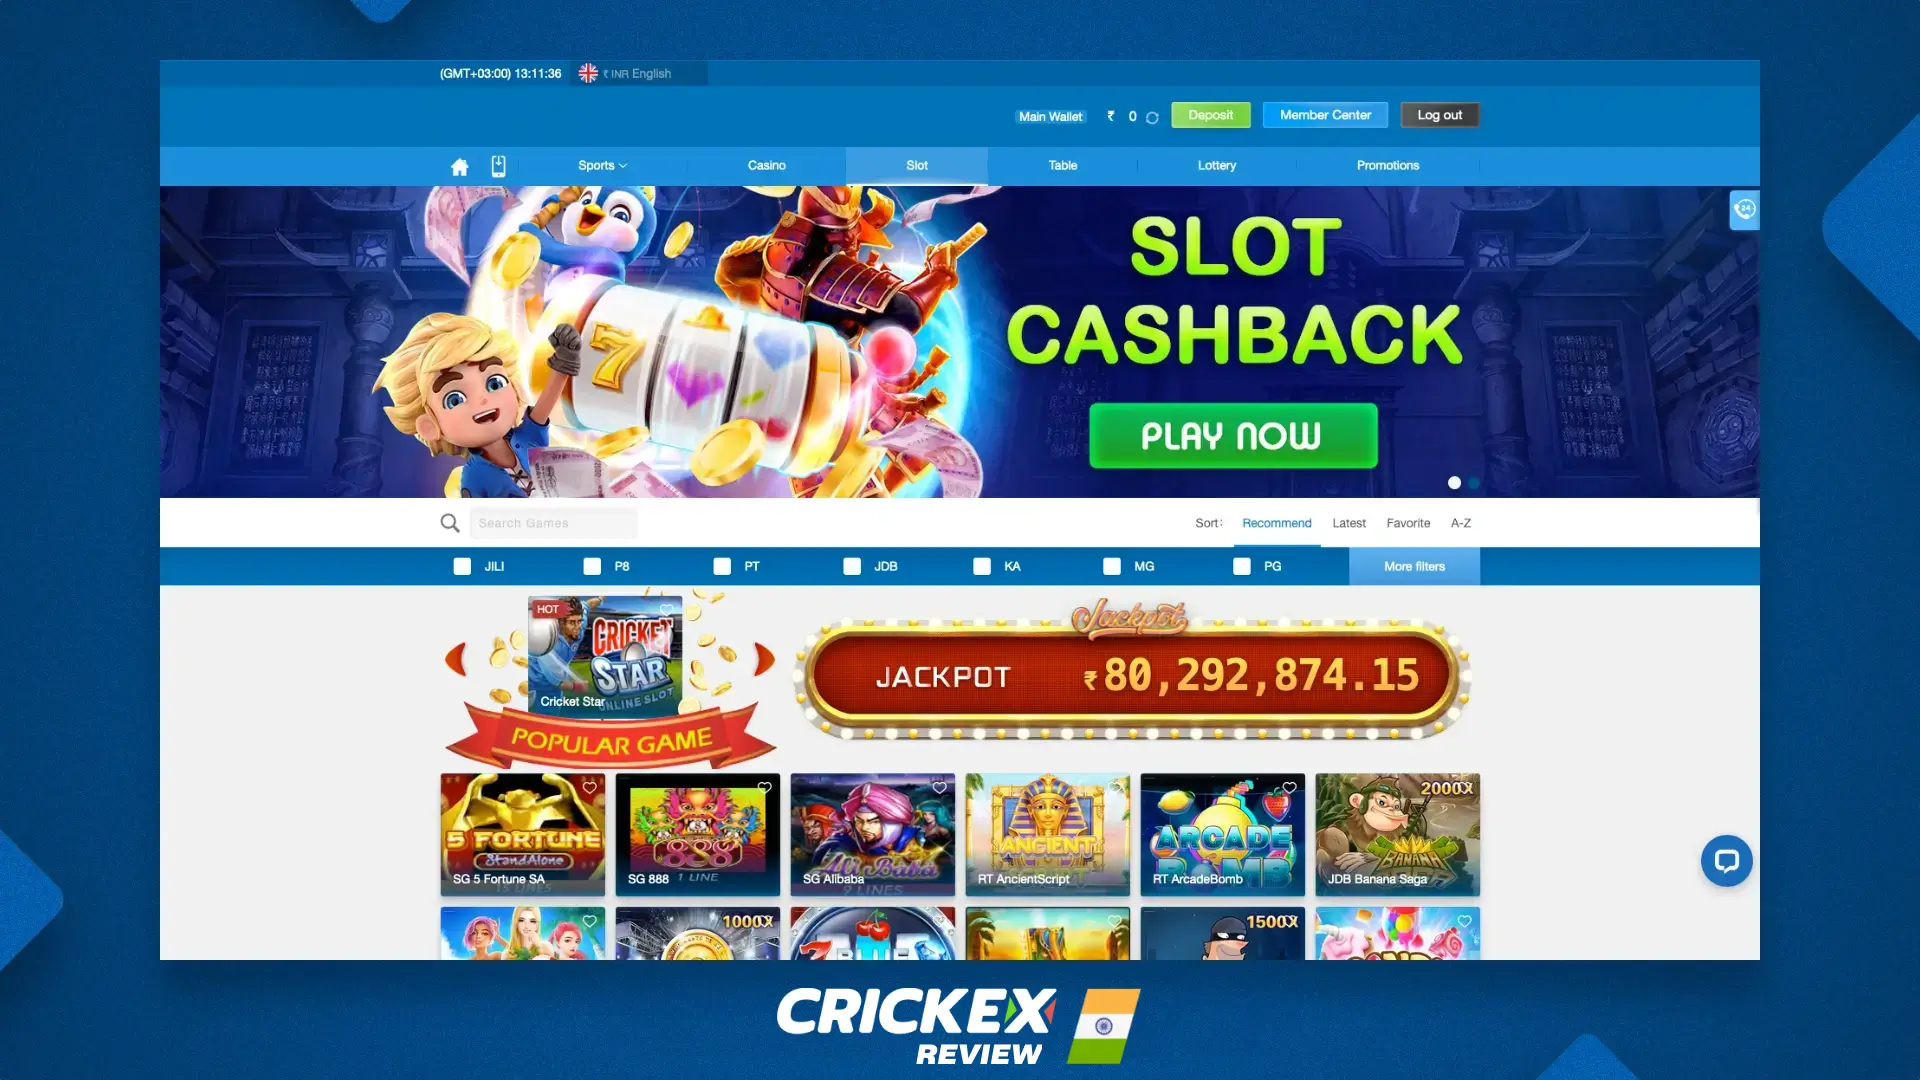 Key benefits of Crickex gambling platform for players from India